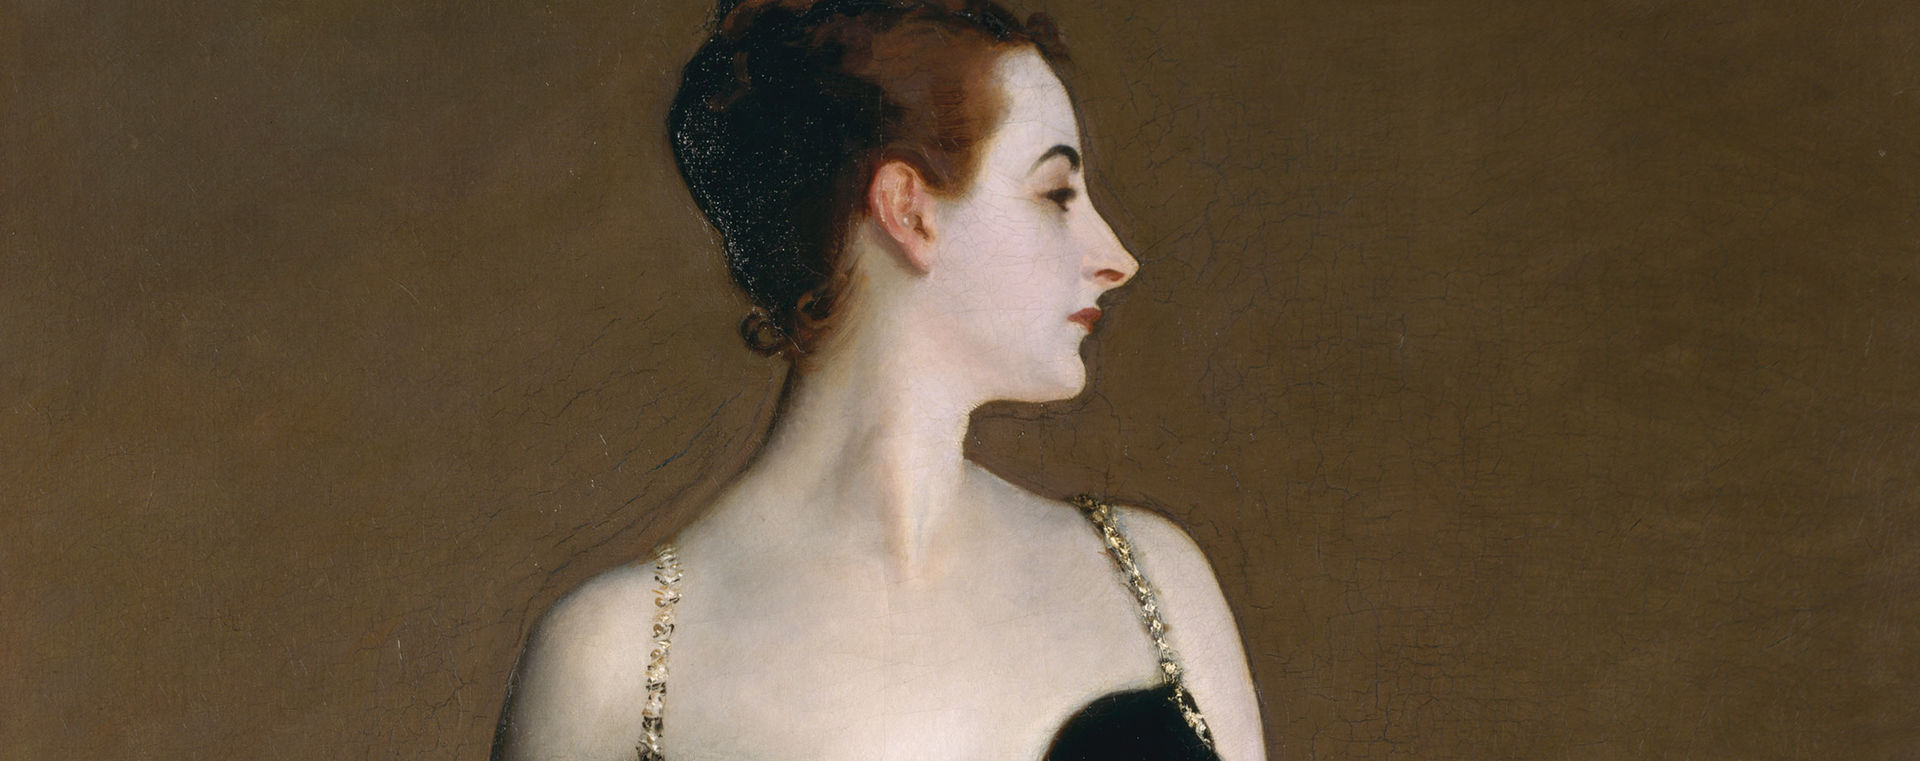 Detail of painting of a woman in a low-cut black dress looking off to the side.